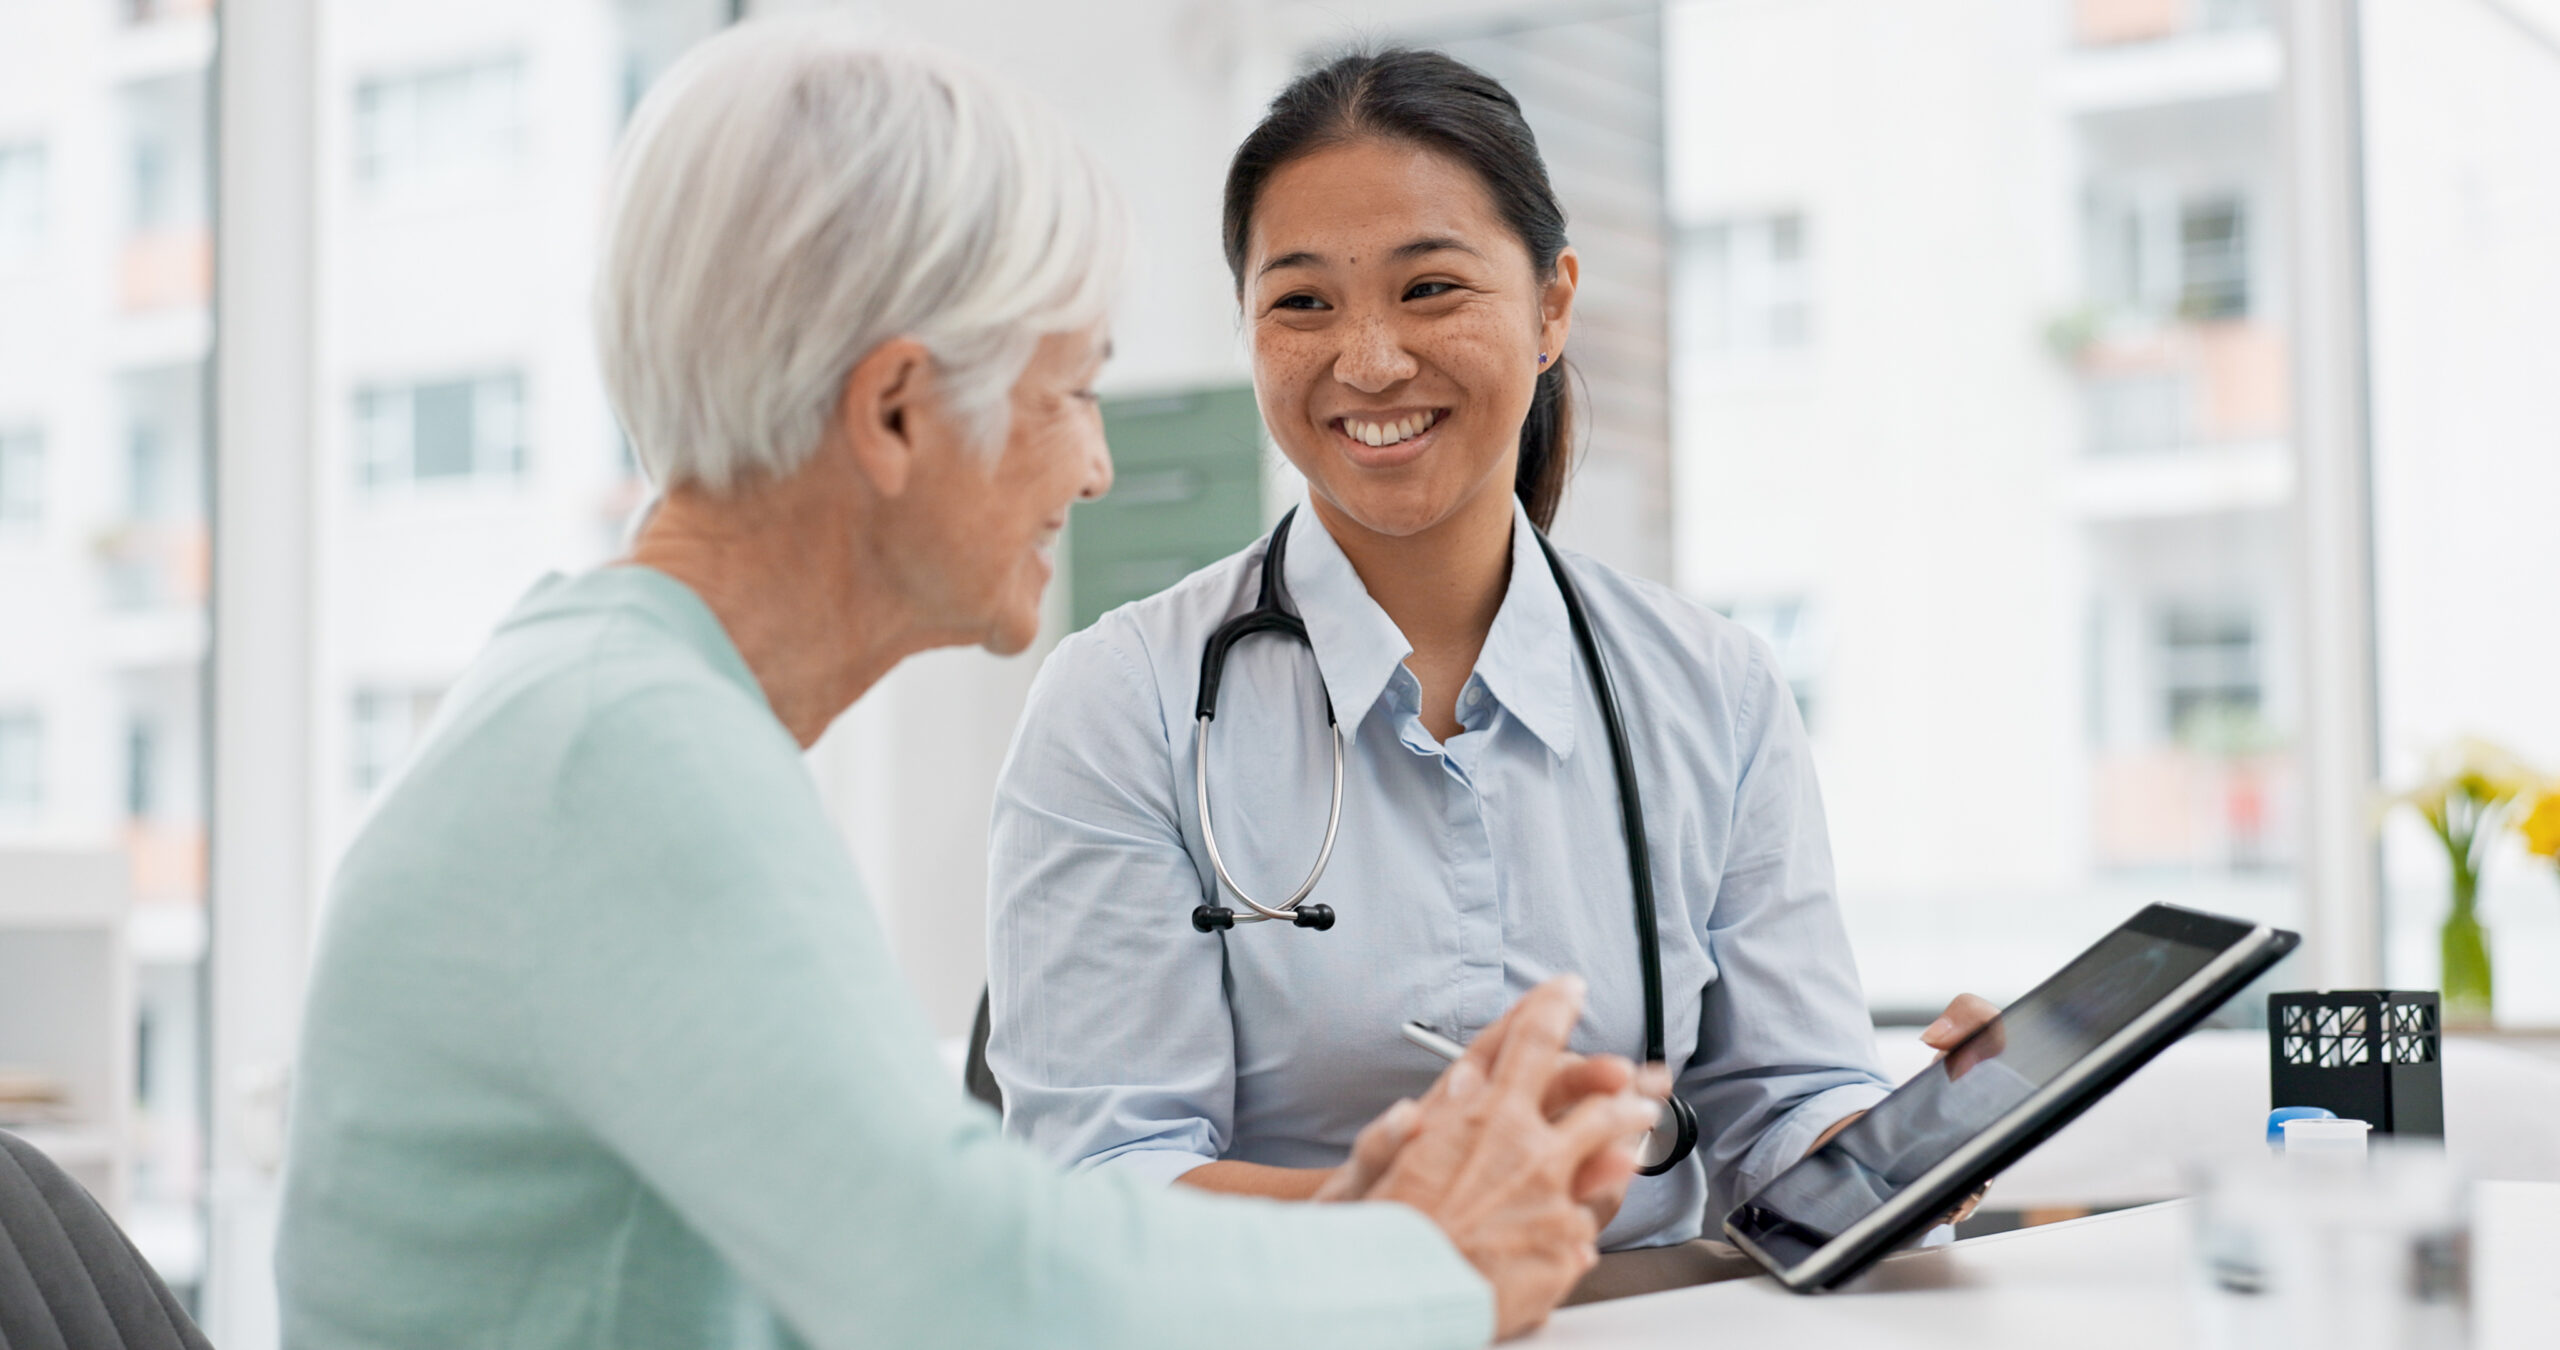 The Intersection of Digital Patient Engagement and Care Outcomes